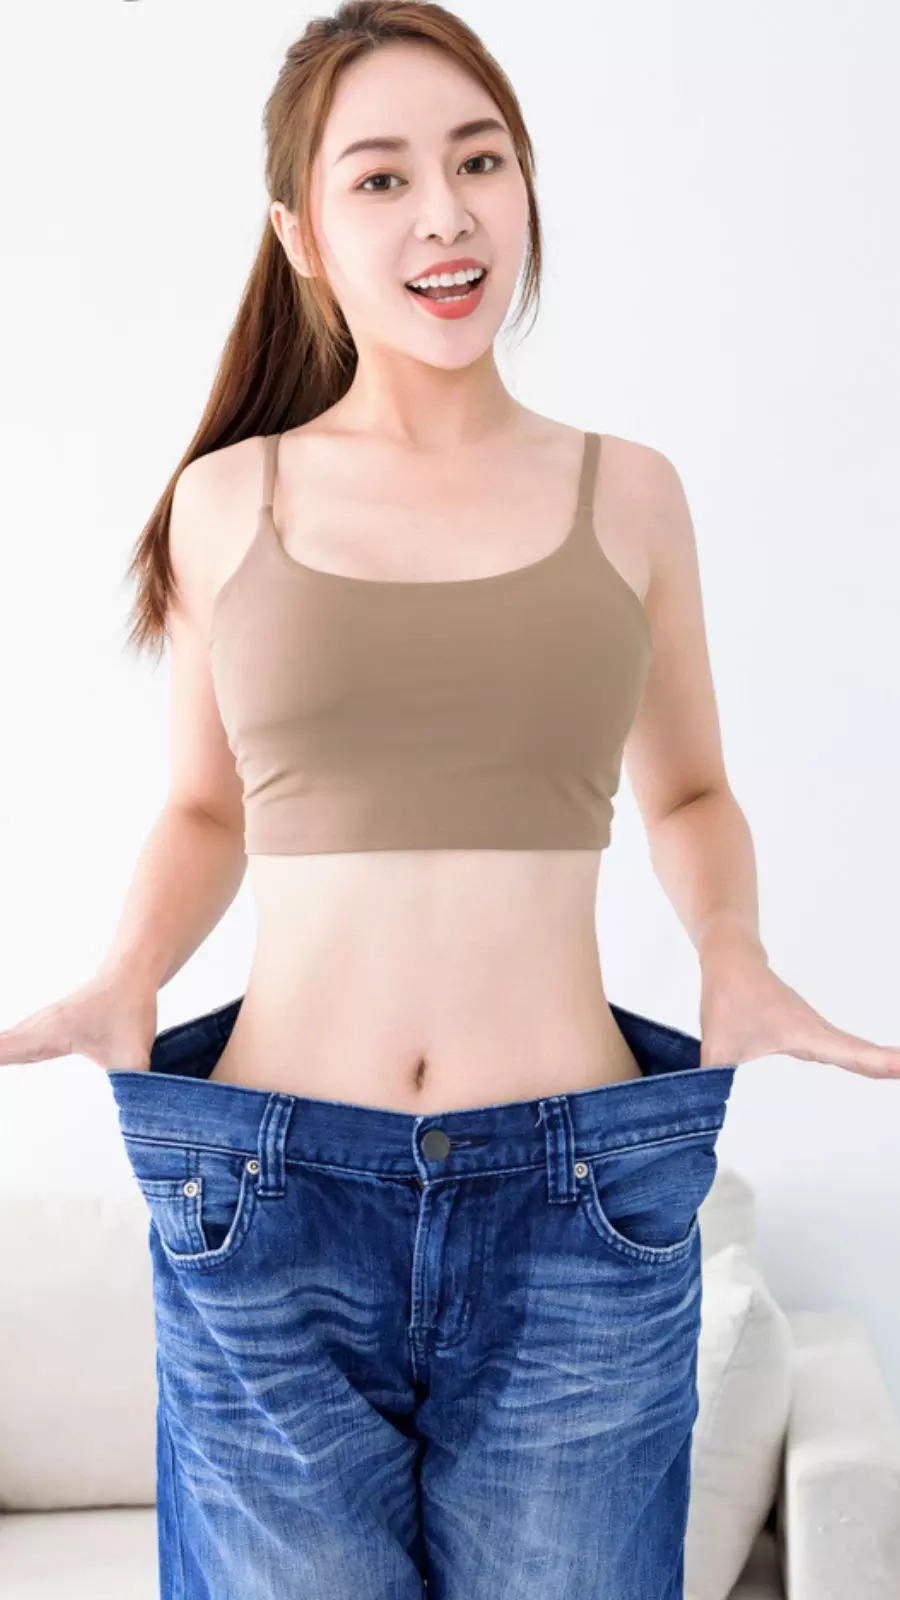 Belly fat loss hacks without diet and exercise